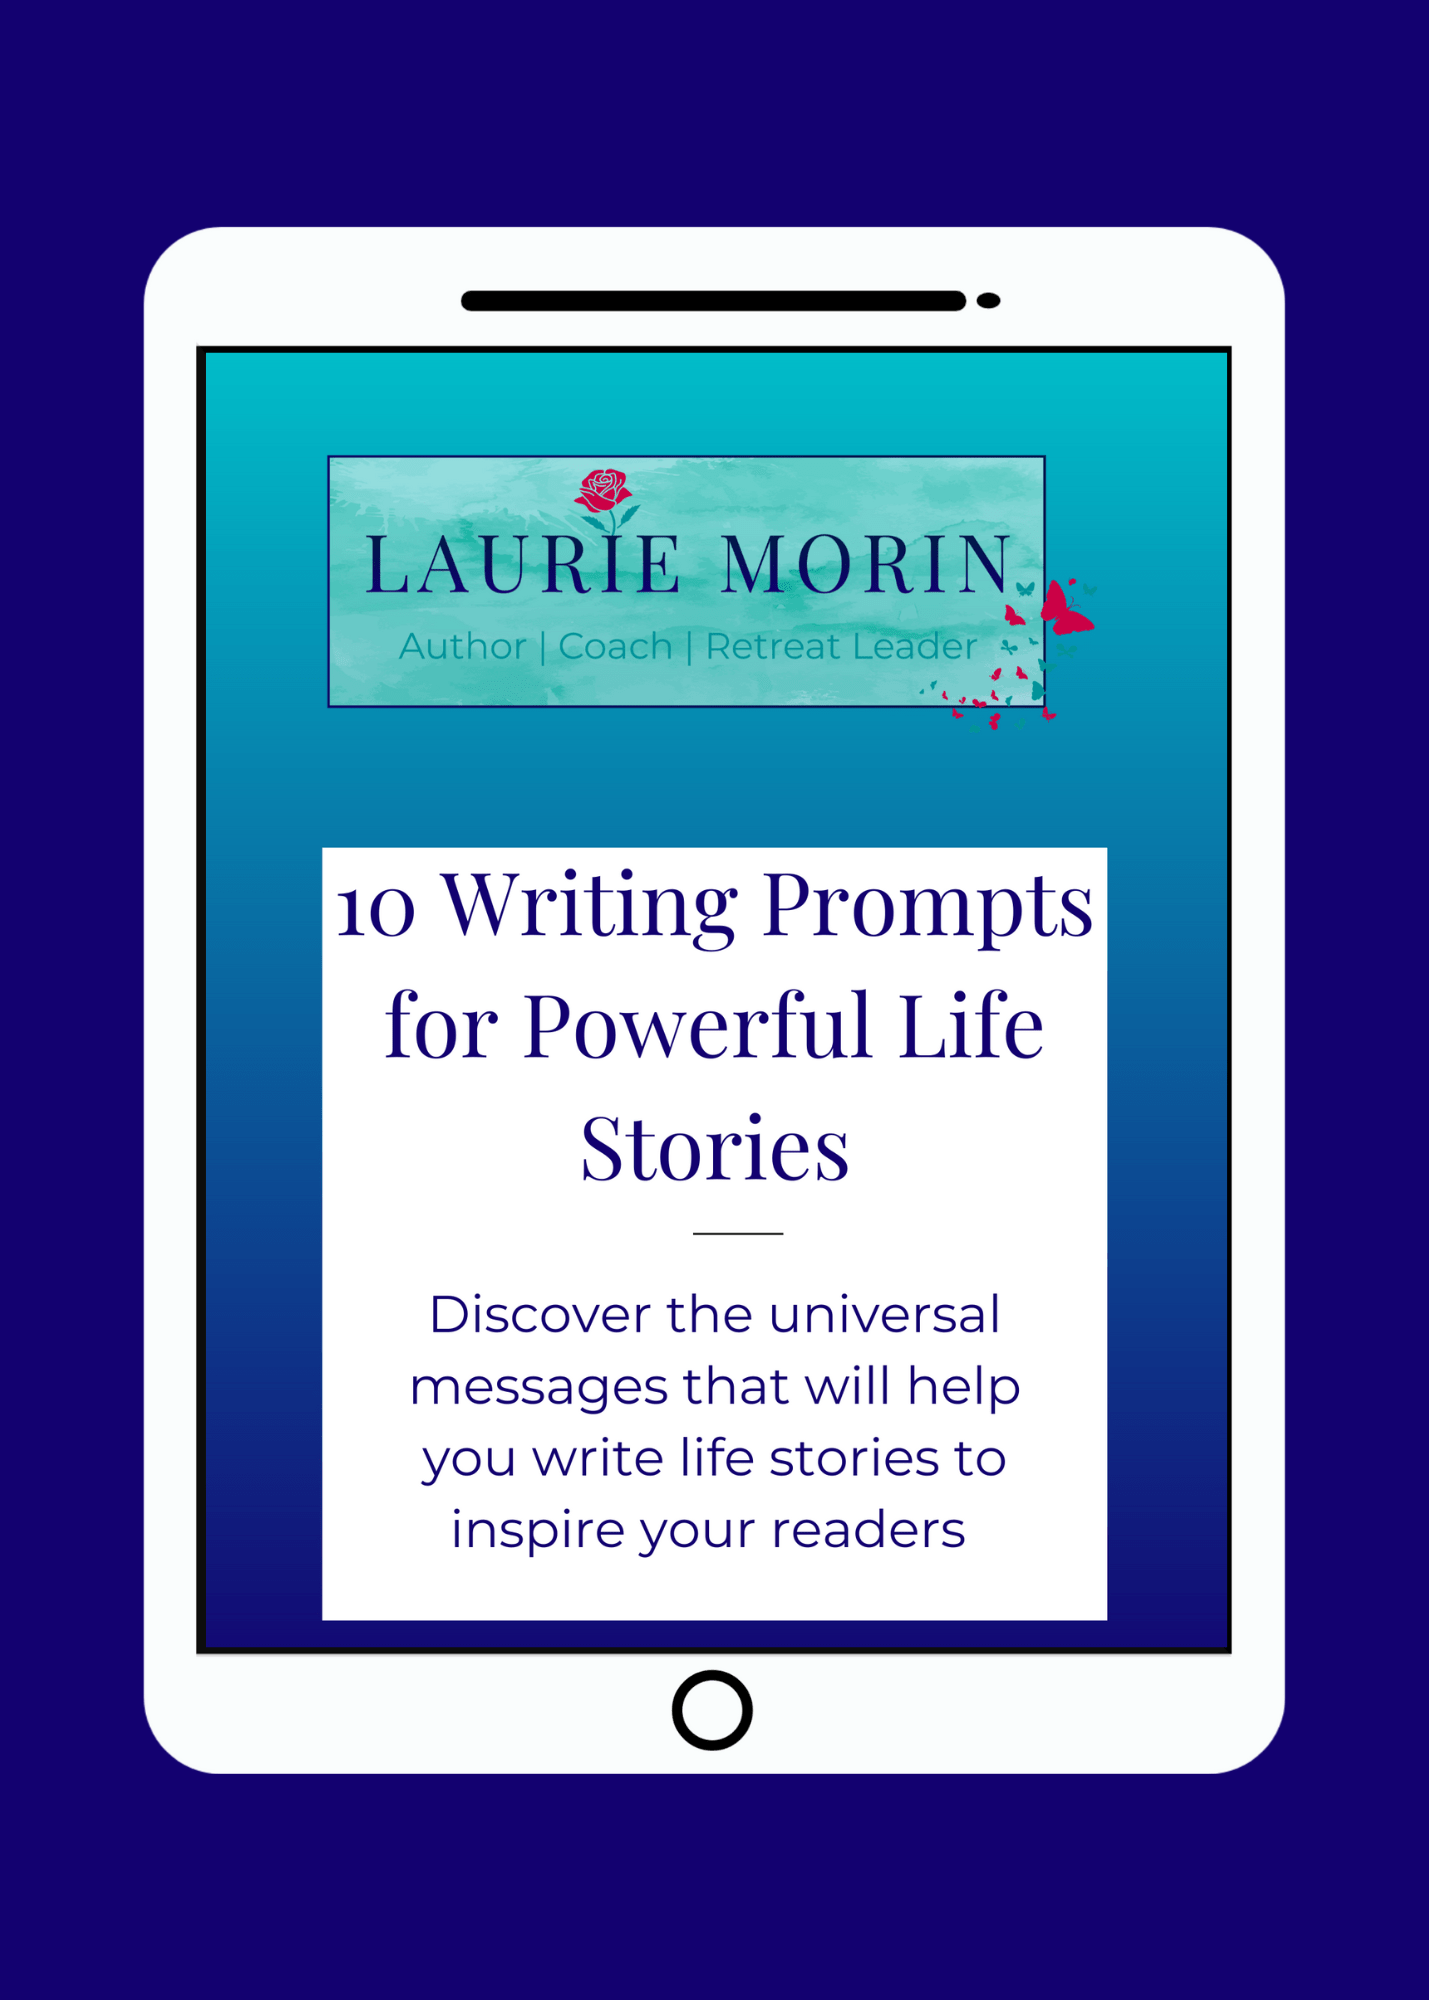 10 Writing Prompts for Powerful Stories